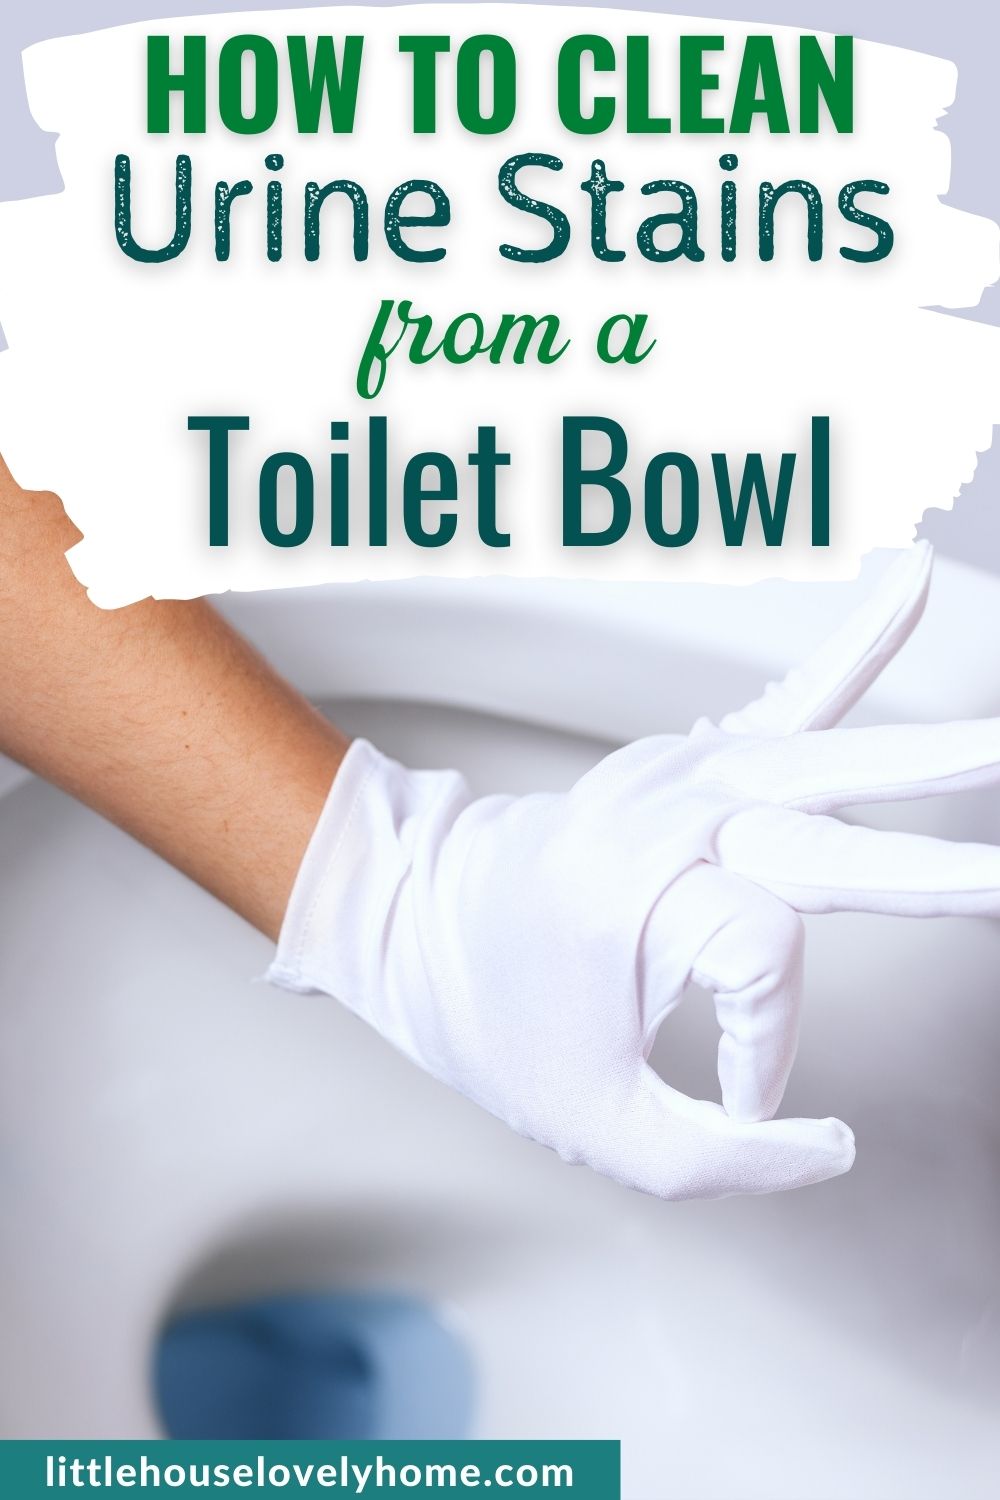 A hand gesturing an OK sign over a clean toilet bowl with text overlays that read How to Clean Urine Stains From a Toilet Bowl.